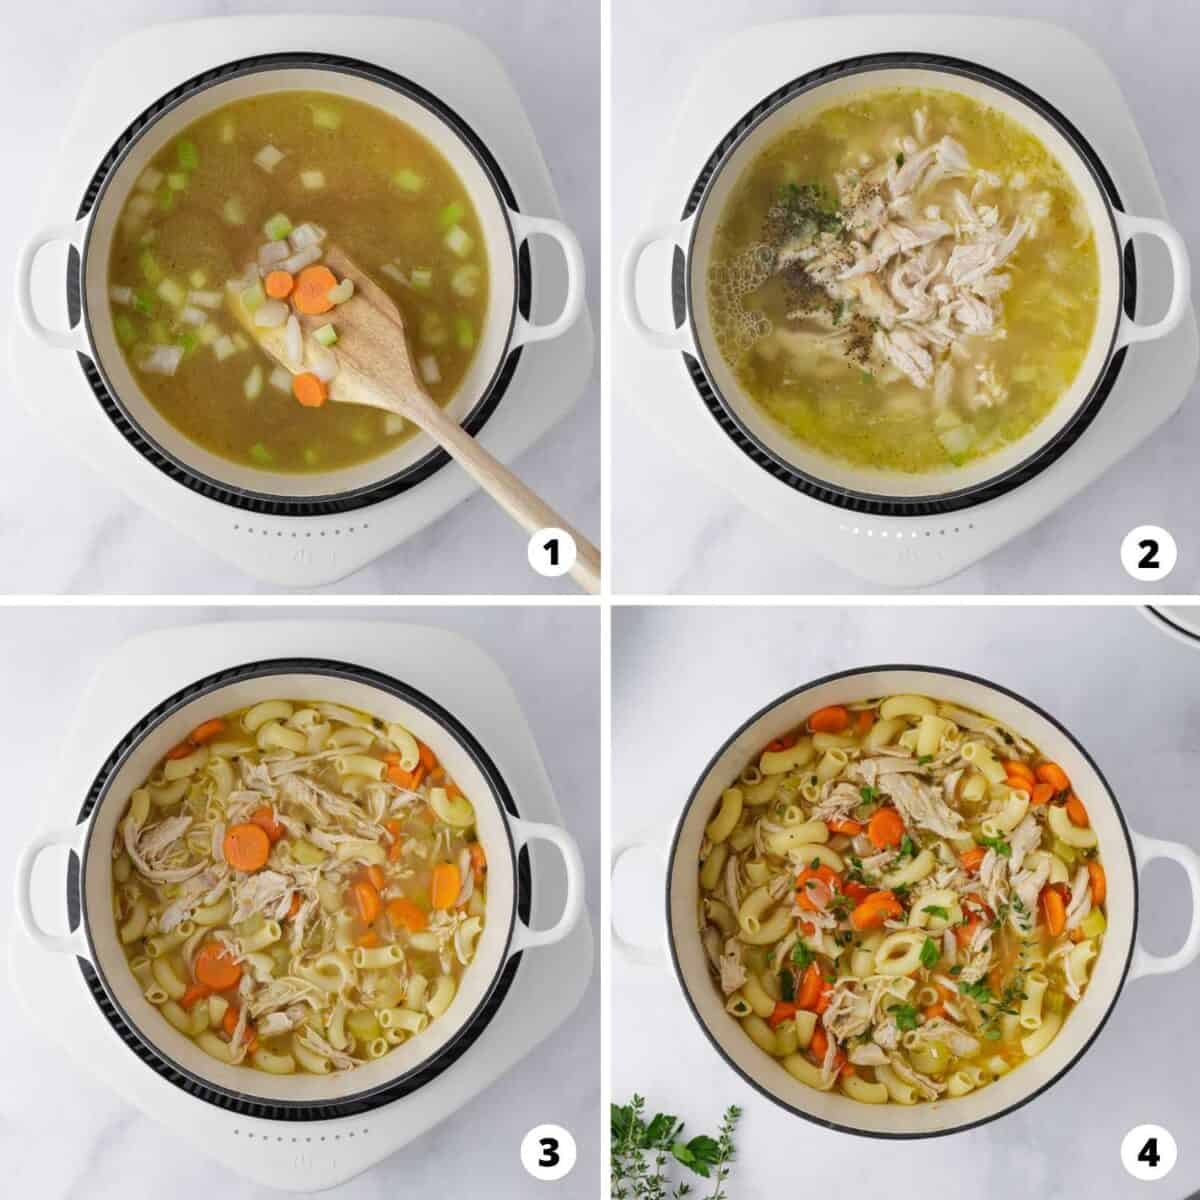 Showing how to make turkey soup in a 4 step collage.